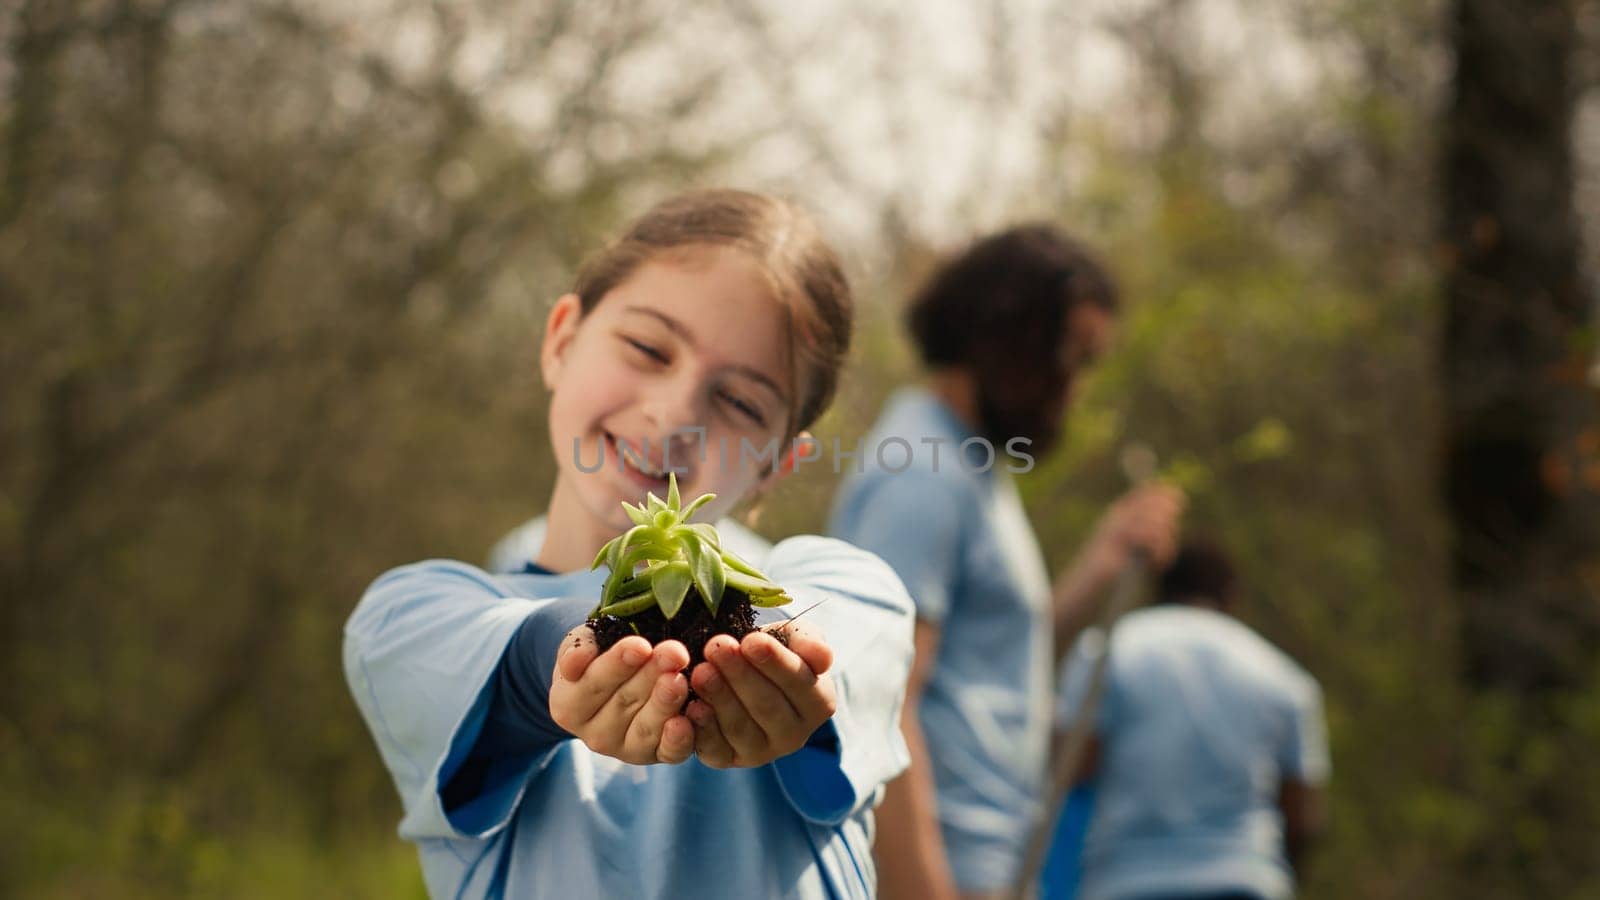 Little kid volunteer holding a small seedling with natural soil in hands by DCStudio